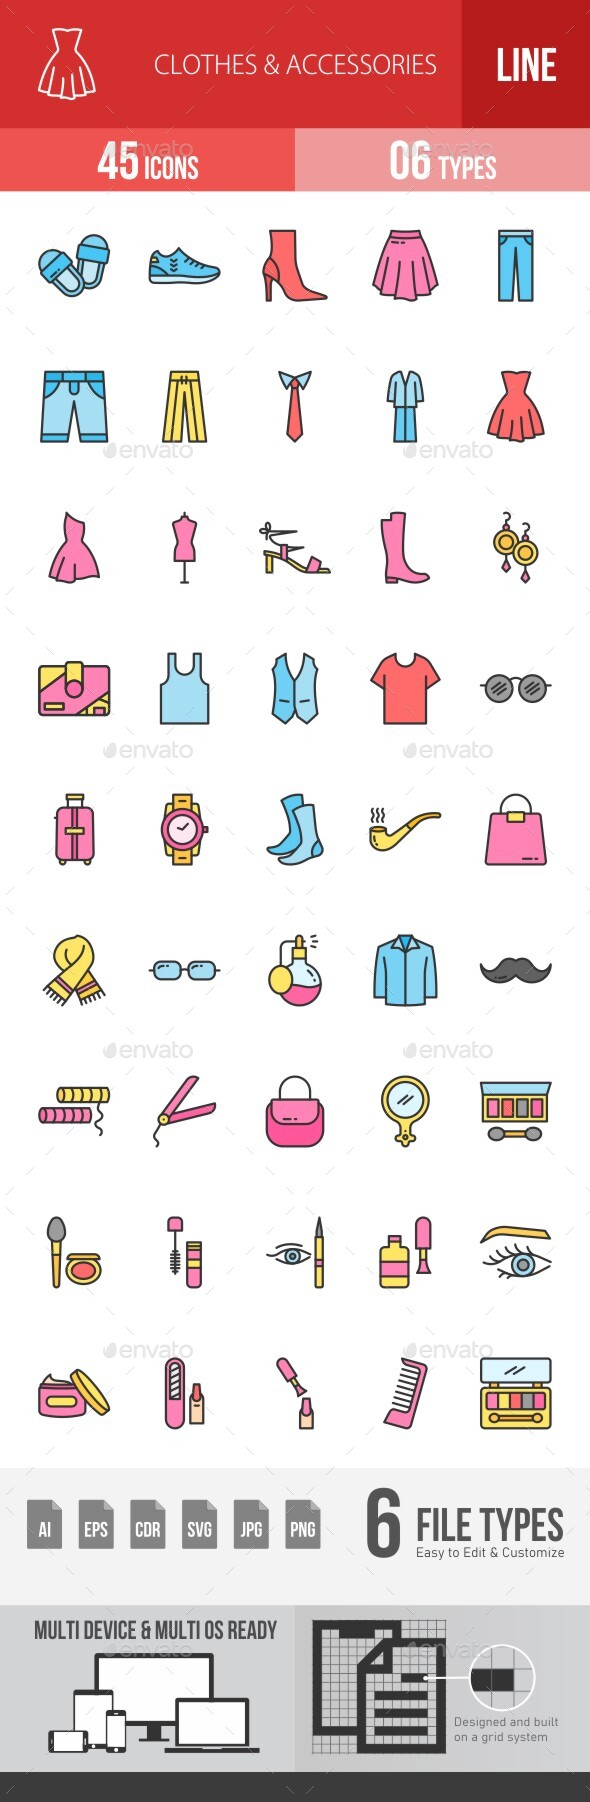 [DOWNLOAD]Clothes & Accessories Filled Line Icons